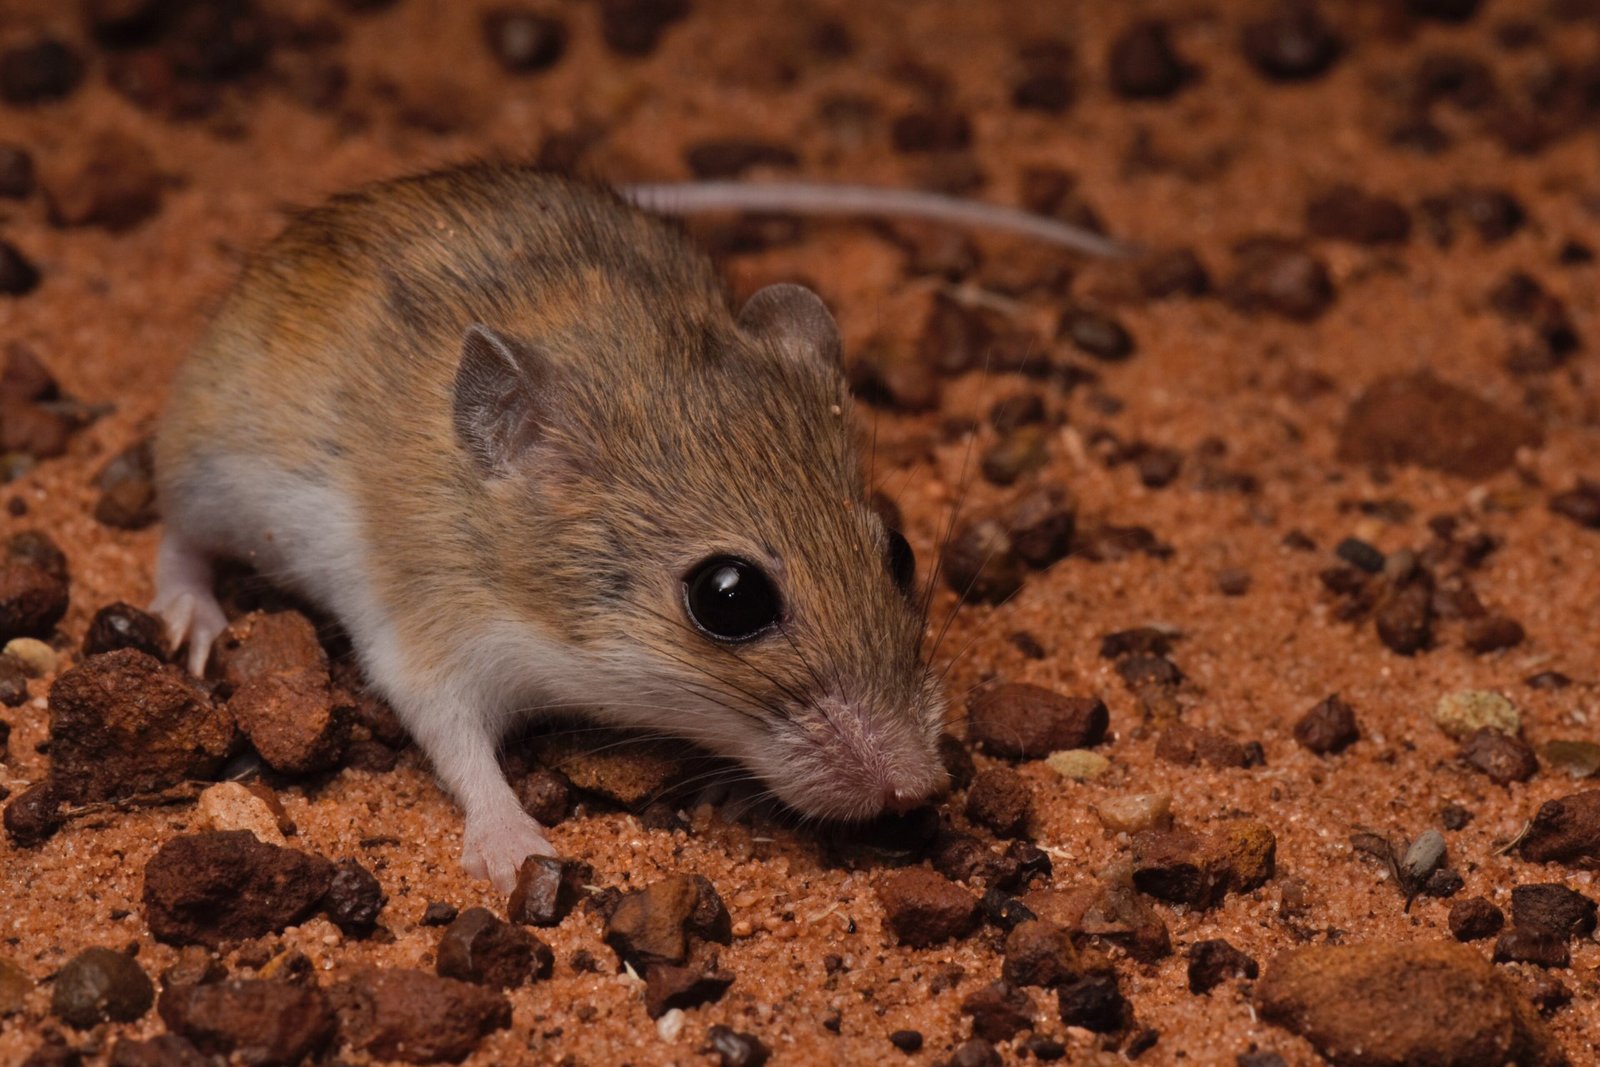 Researchers Discover New Native Species of Mouse in Australia